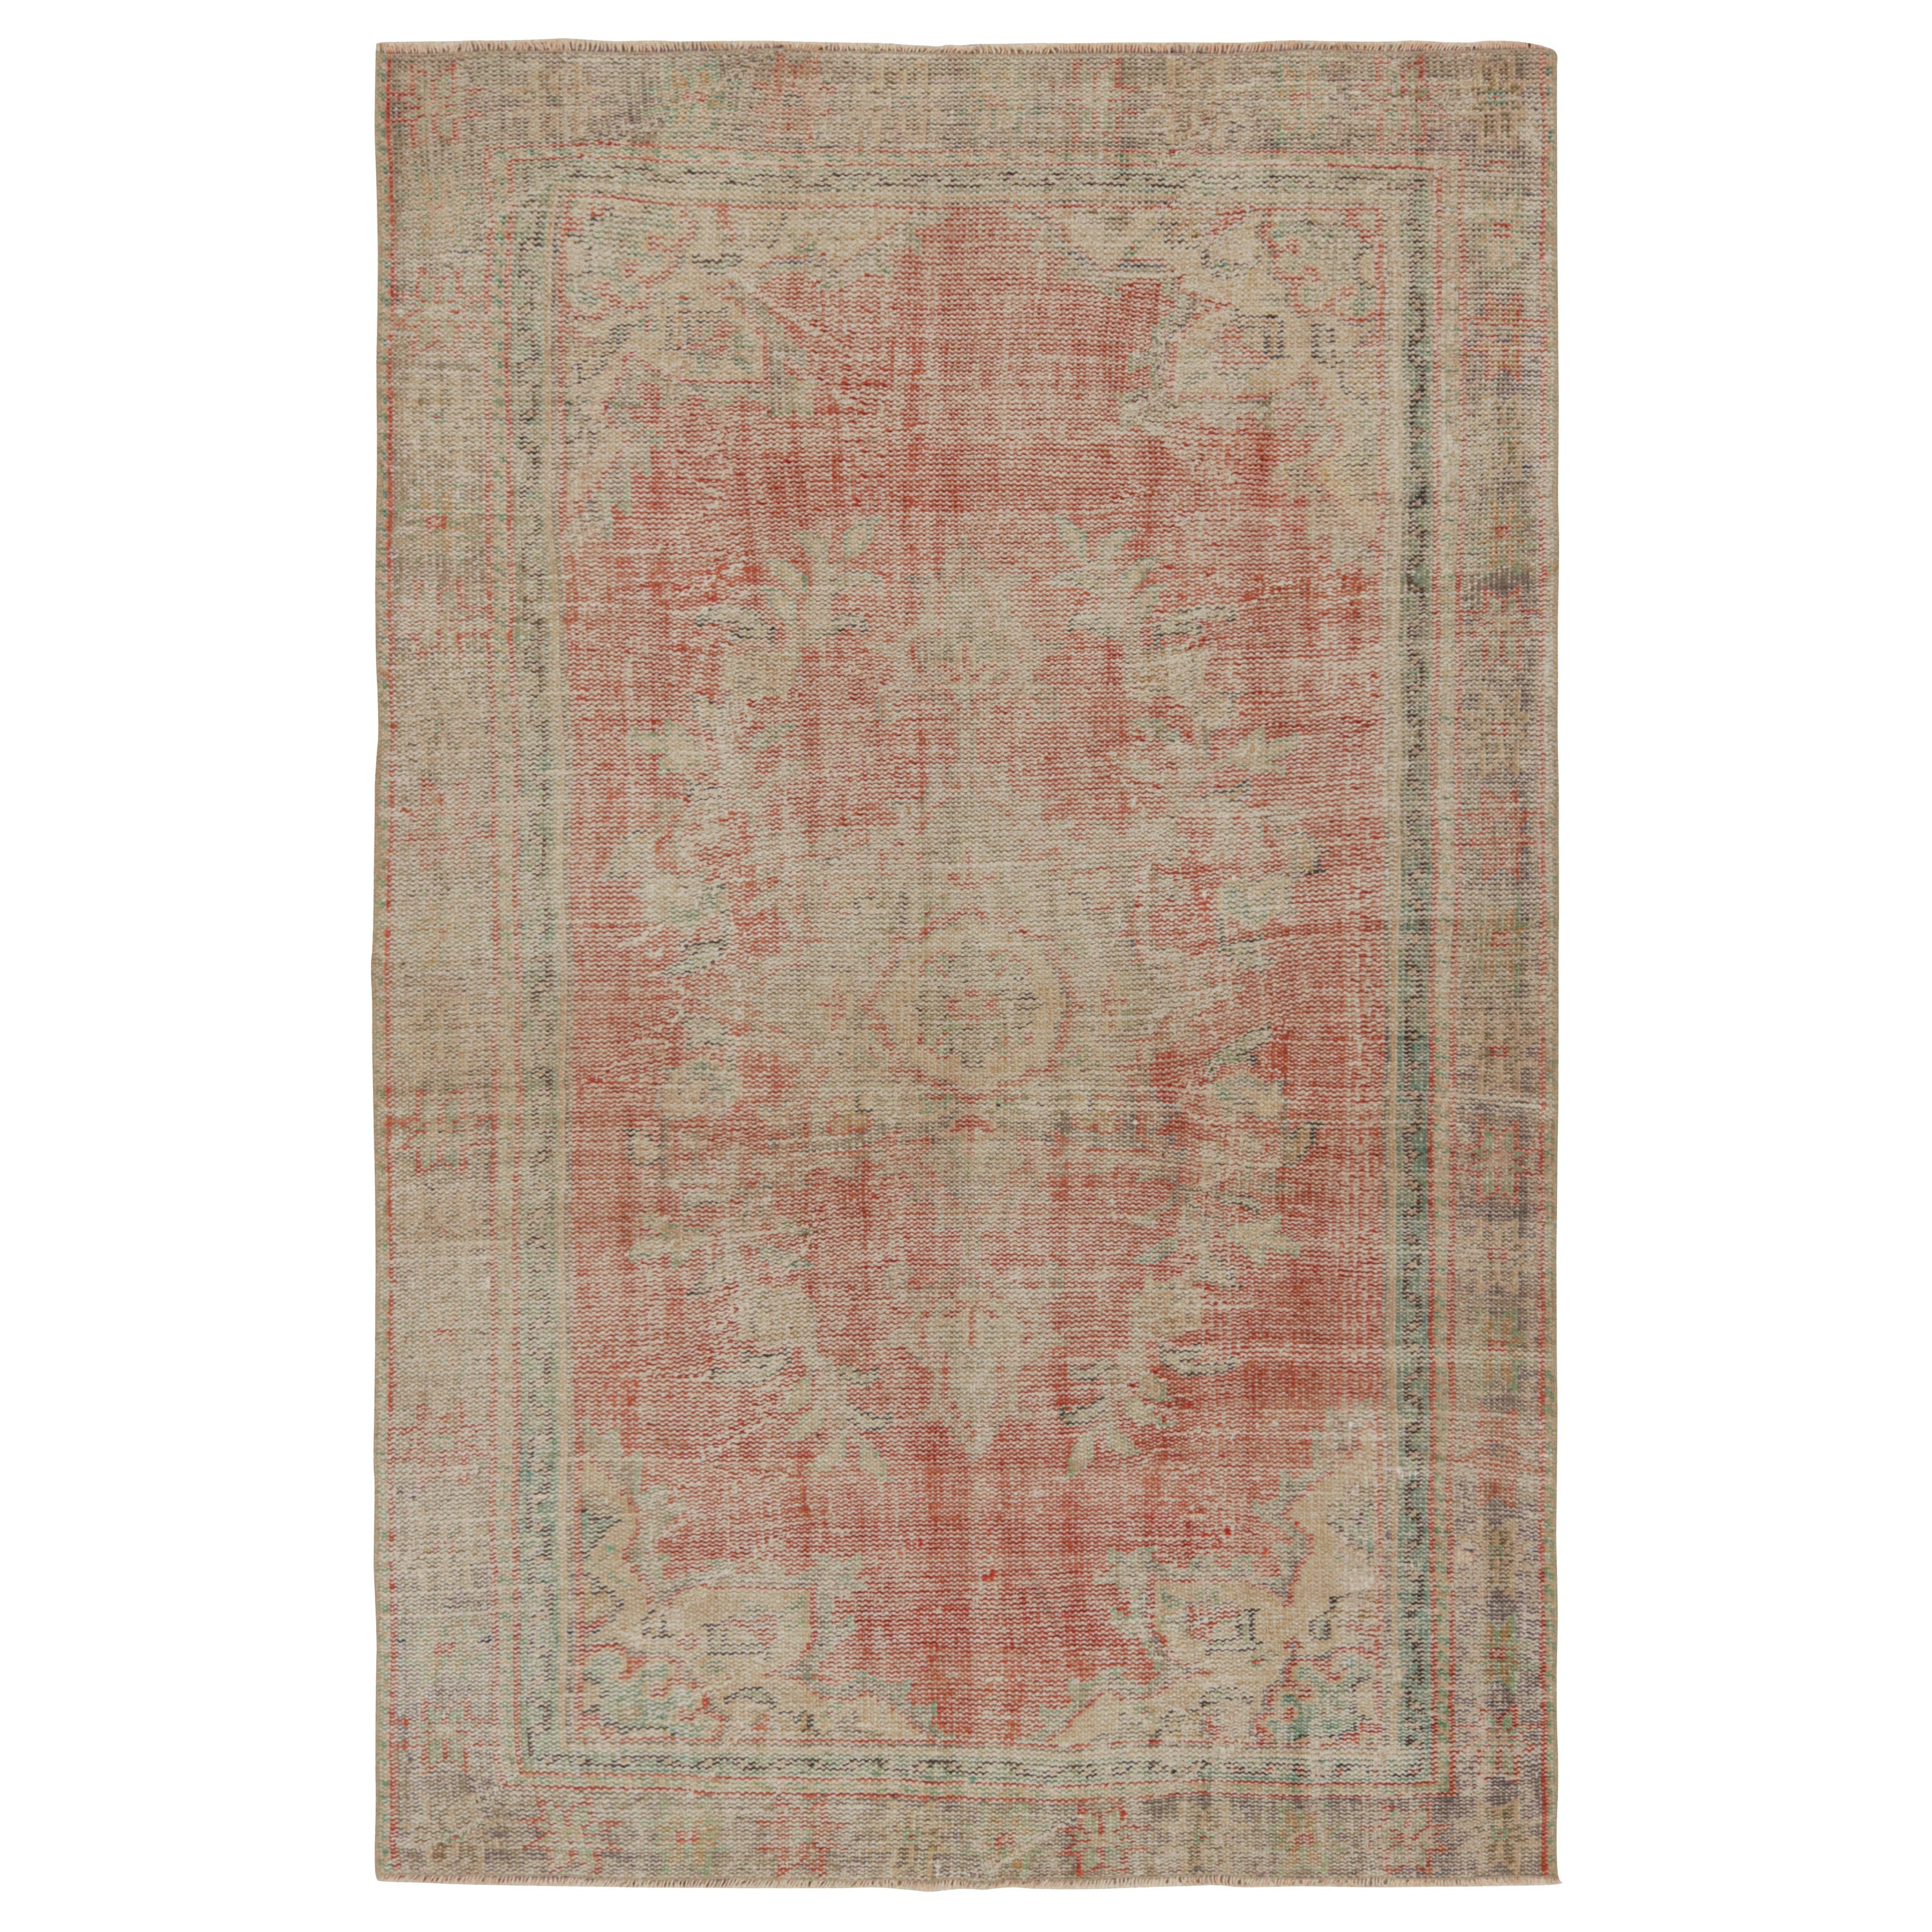 Vintage European Style Rug, with Geometric Floral Patterns, from Rug & Kilim 